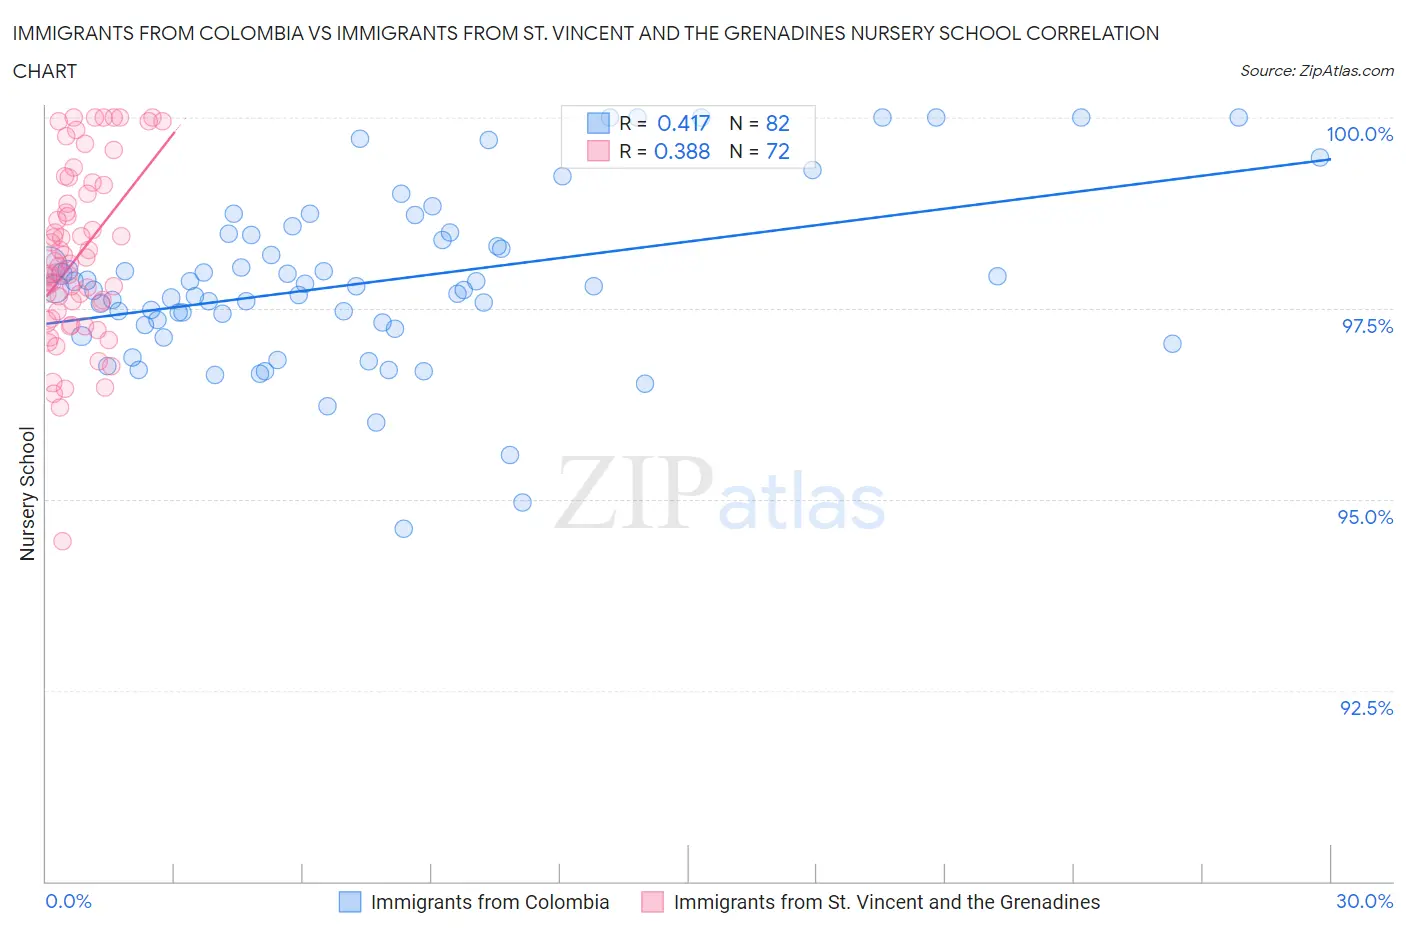 Immigrants from Colombia vs Immigrants from St. Vincent and the Grenadines Nursery School